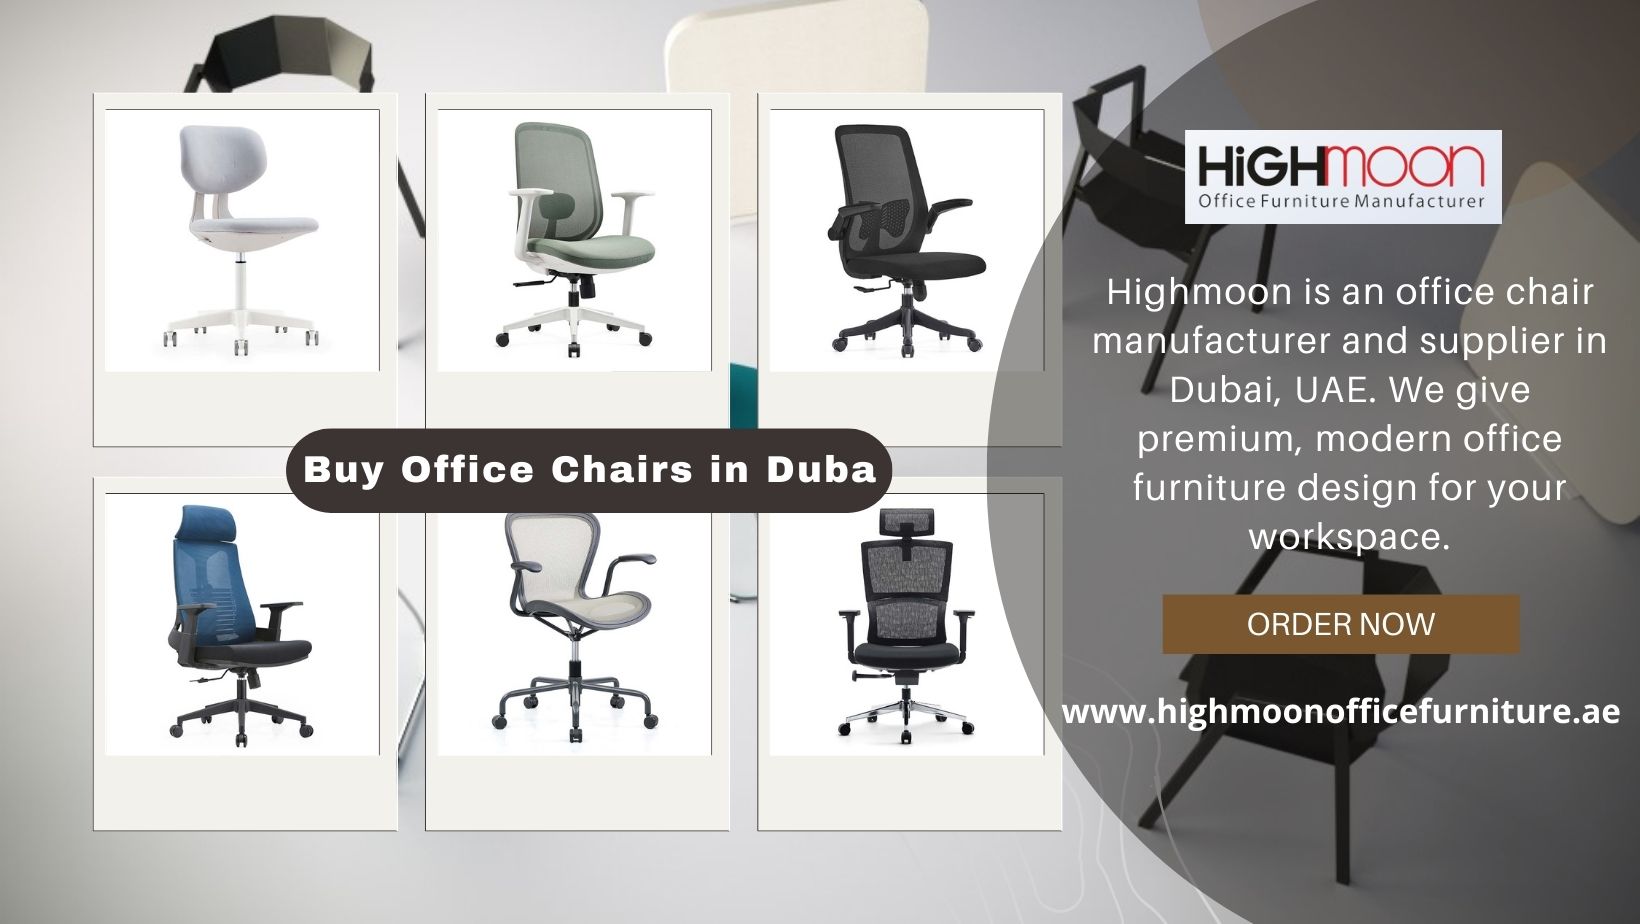 Buy Office Chairs in Dubai at Affordable and Budget Prices